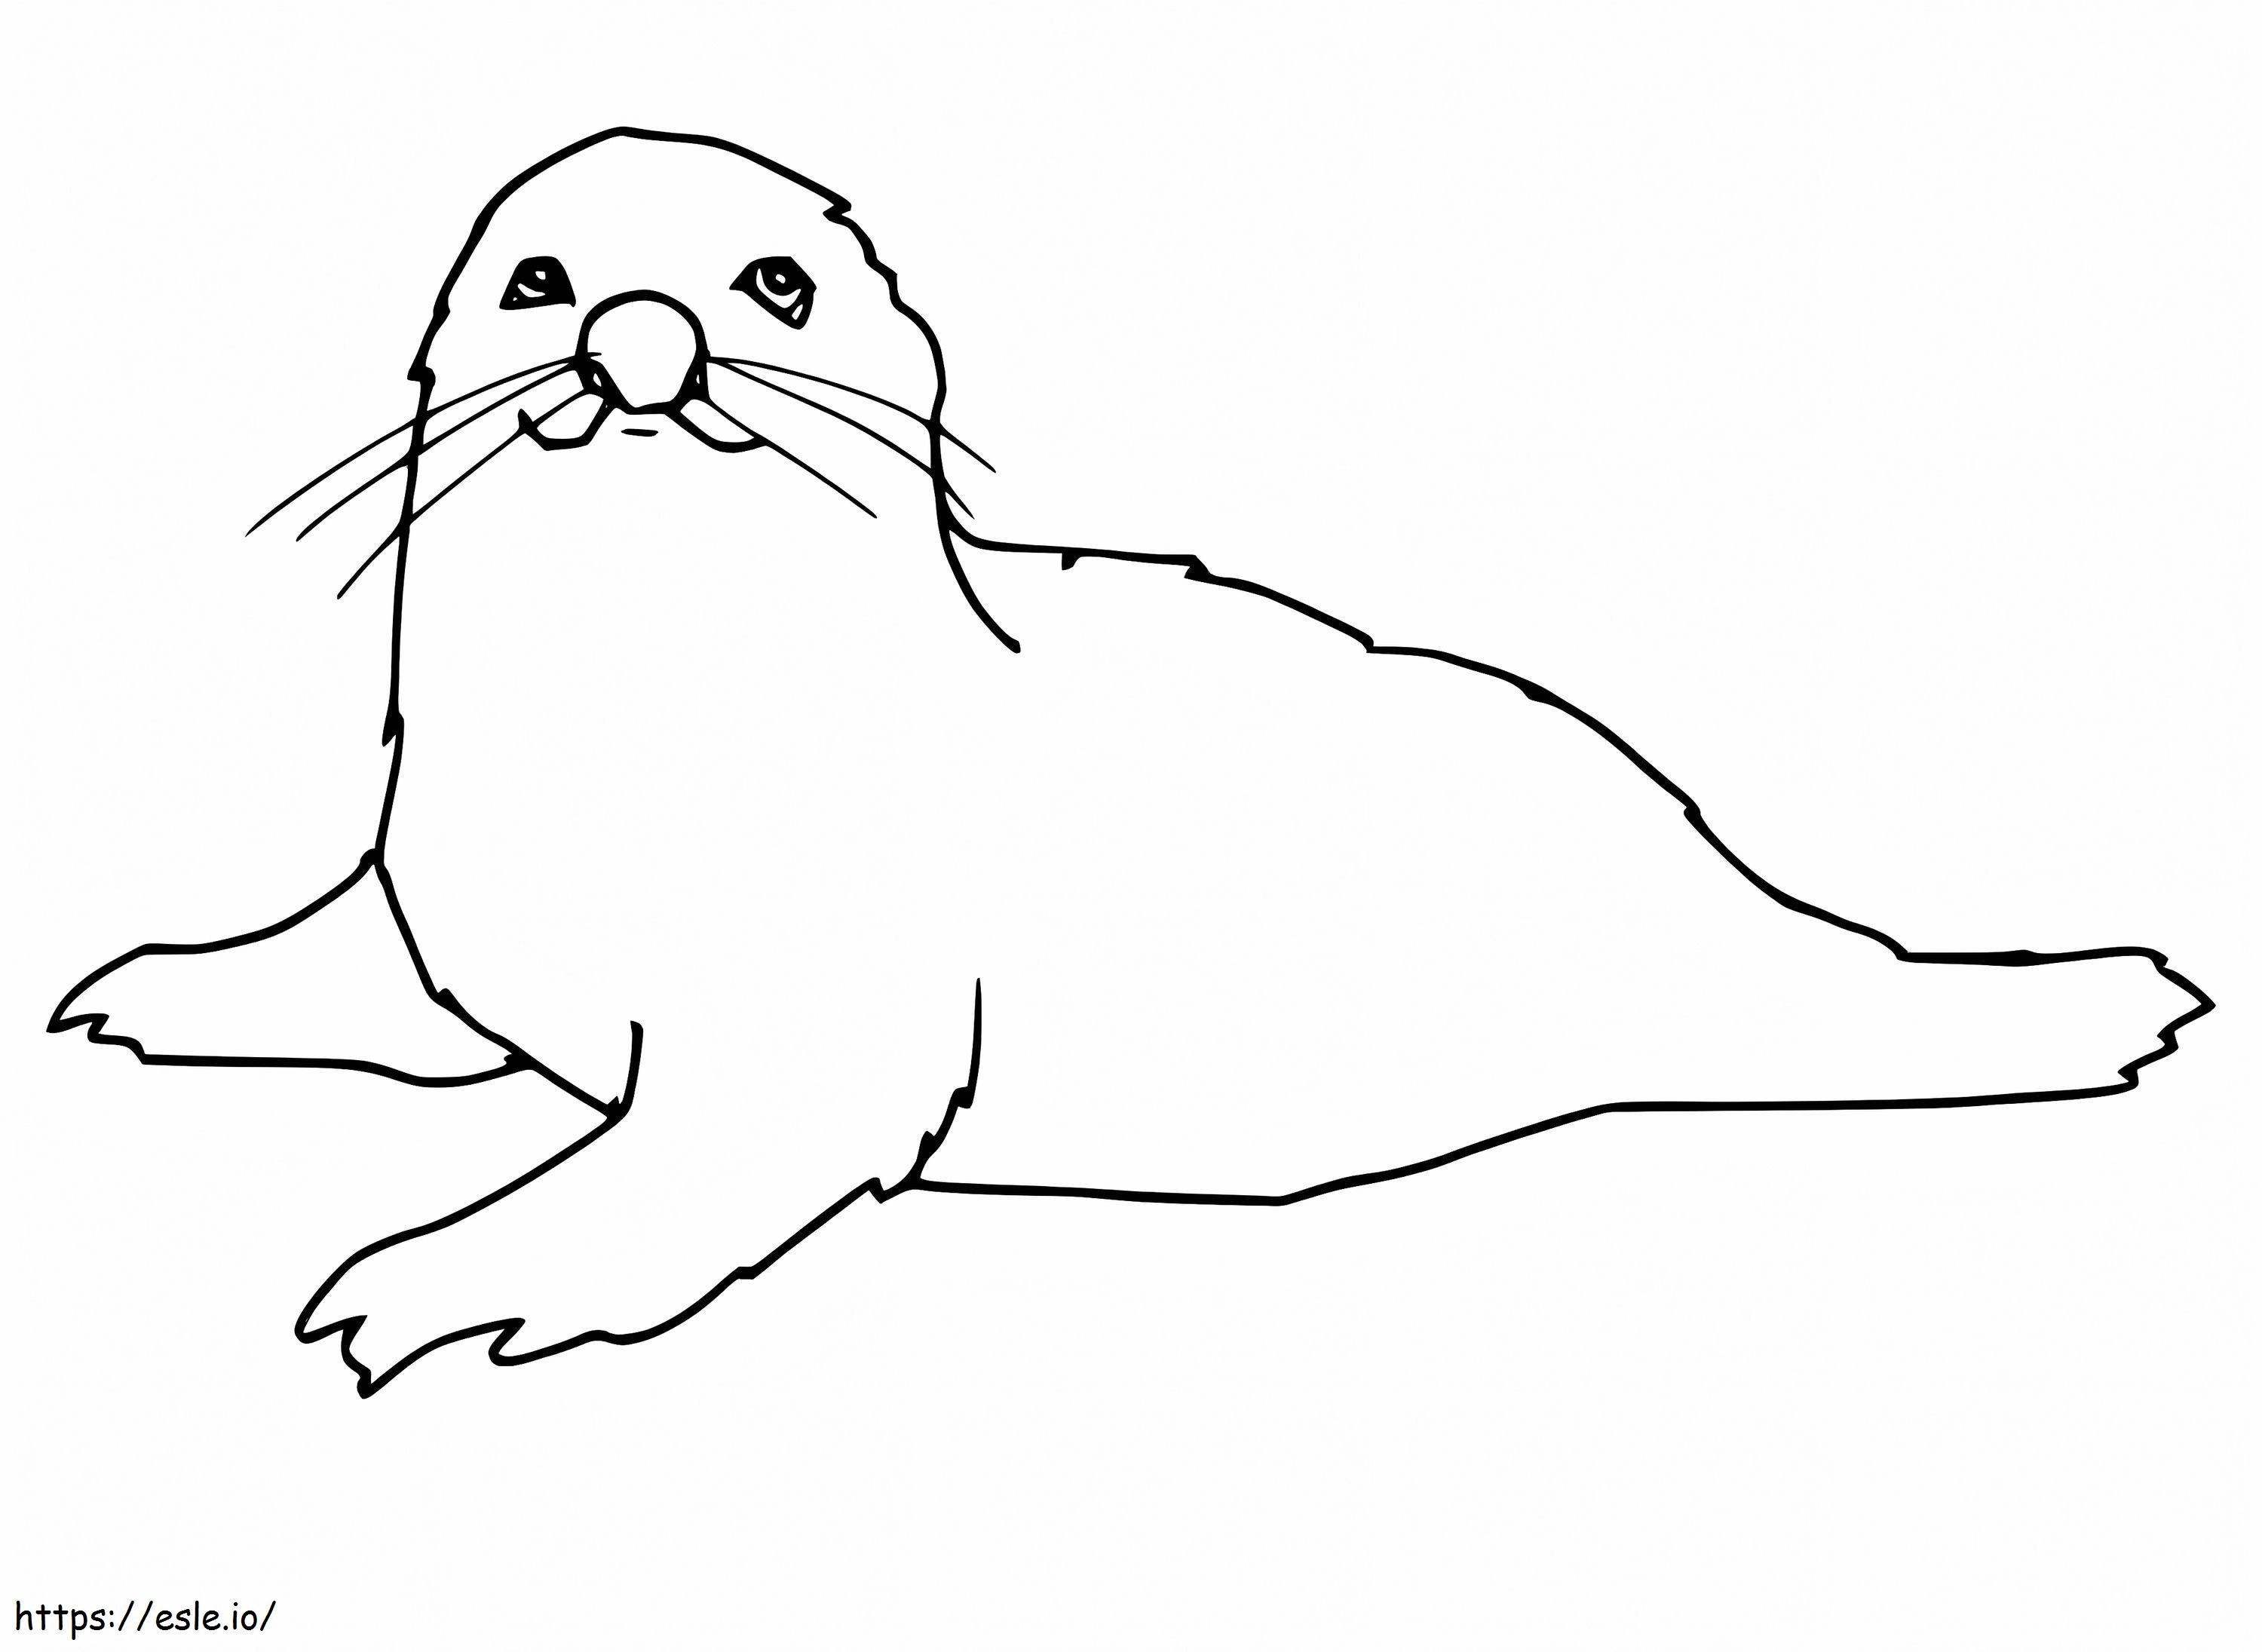 Lie Seal coloring page